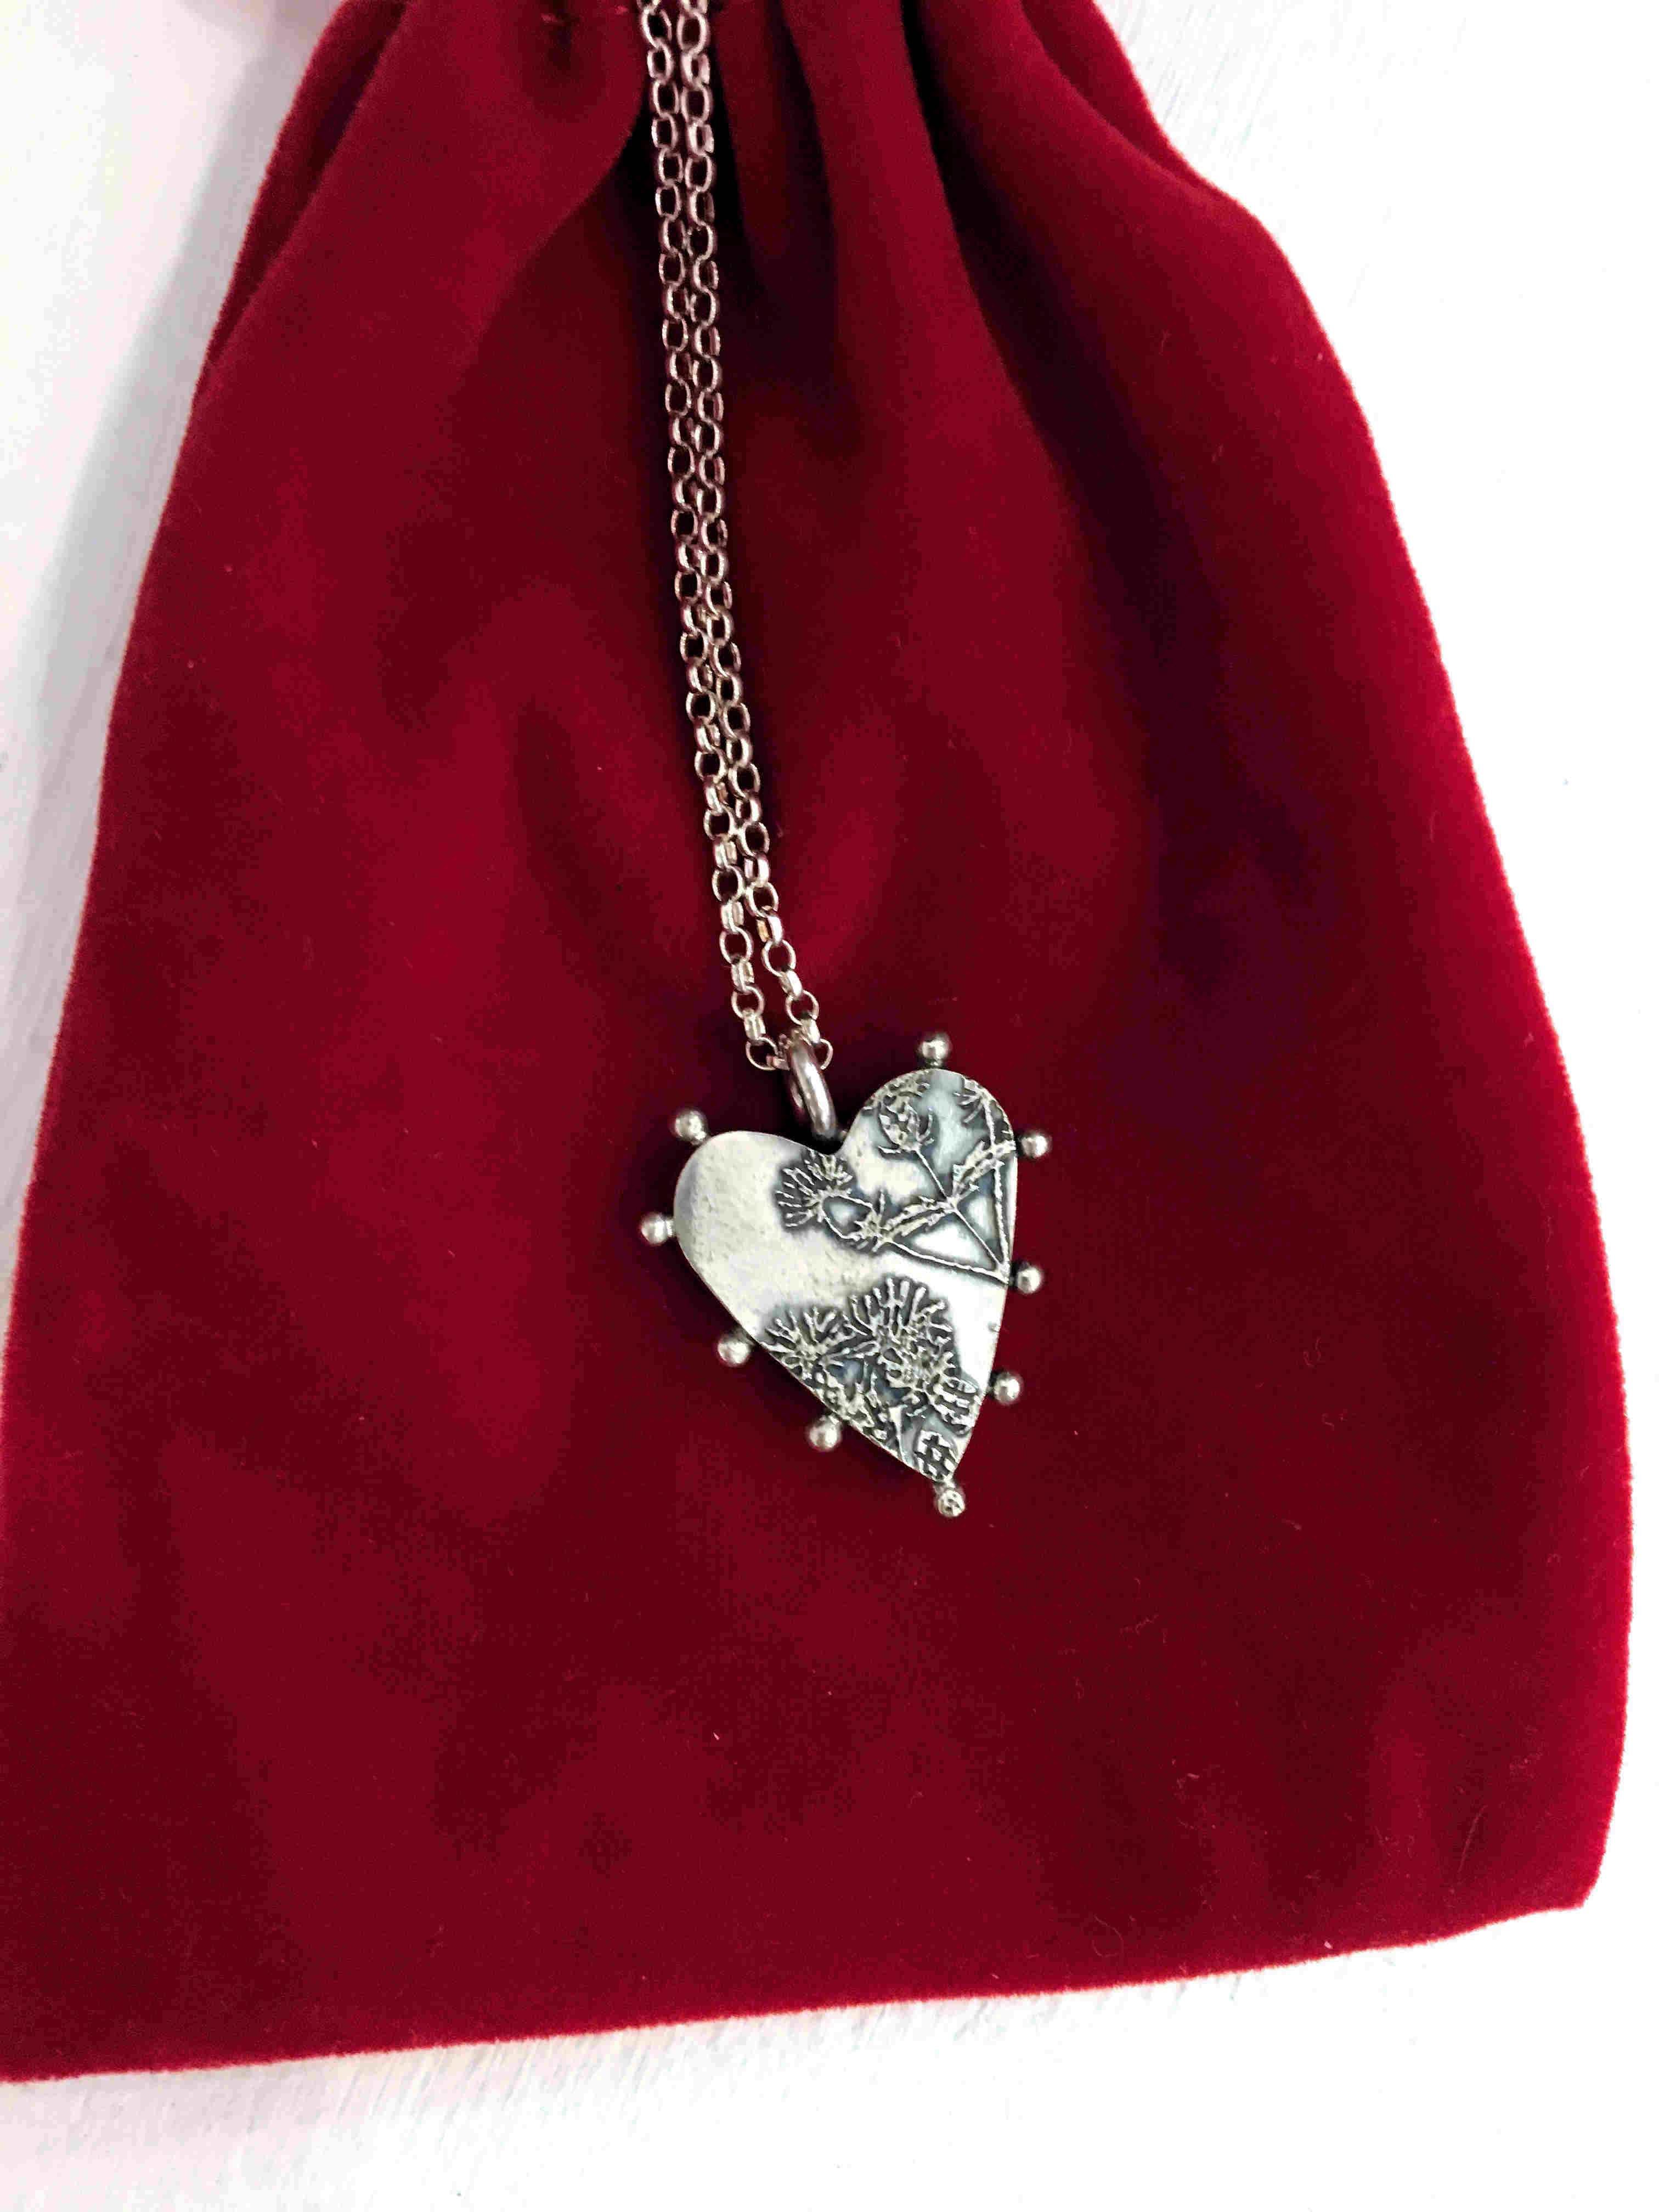 'Box Heart Necklace with Etched Thistles - size 2' by artist Carol Docherty